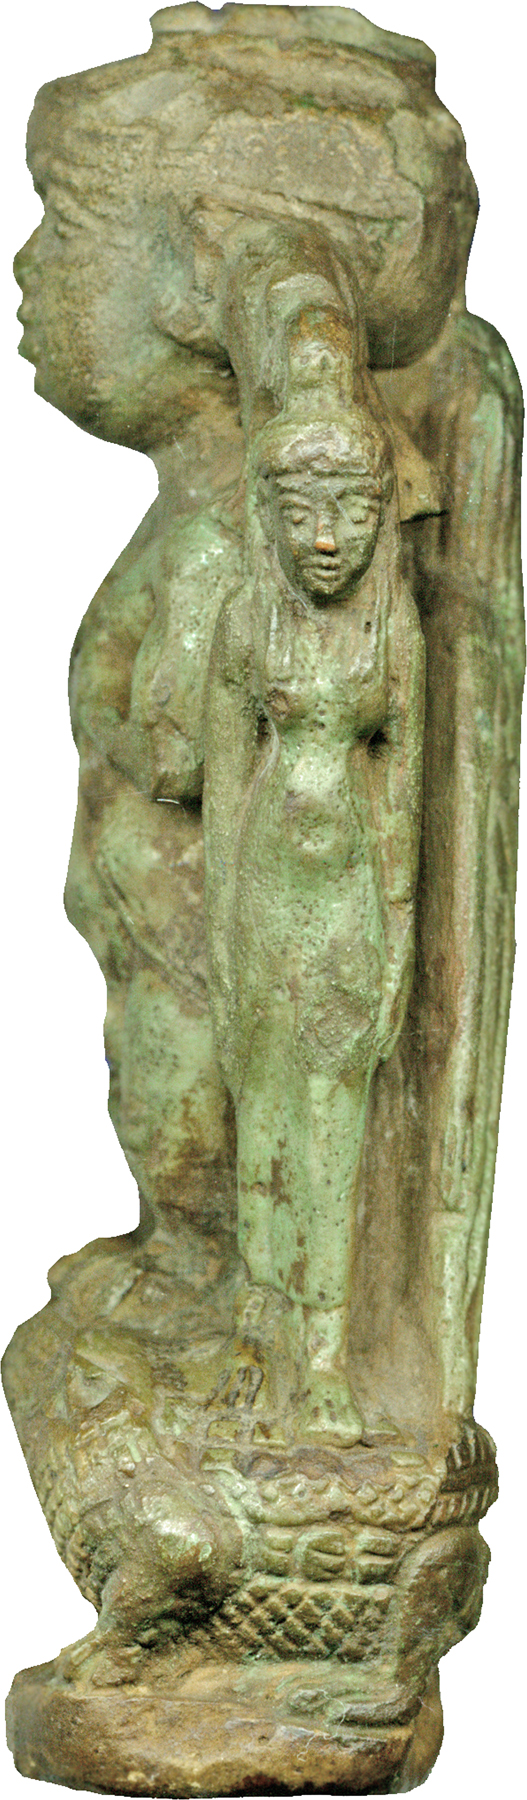 Image for Amulet of Pataikos on Crocodiles